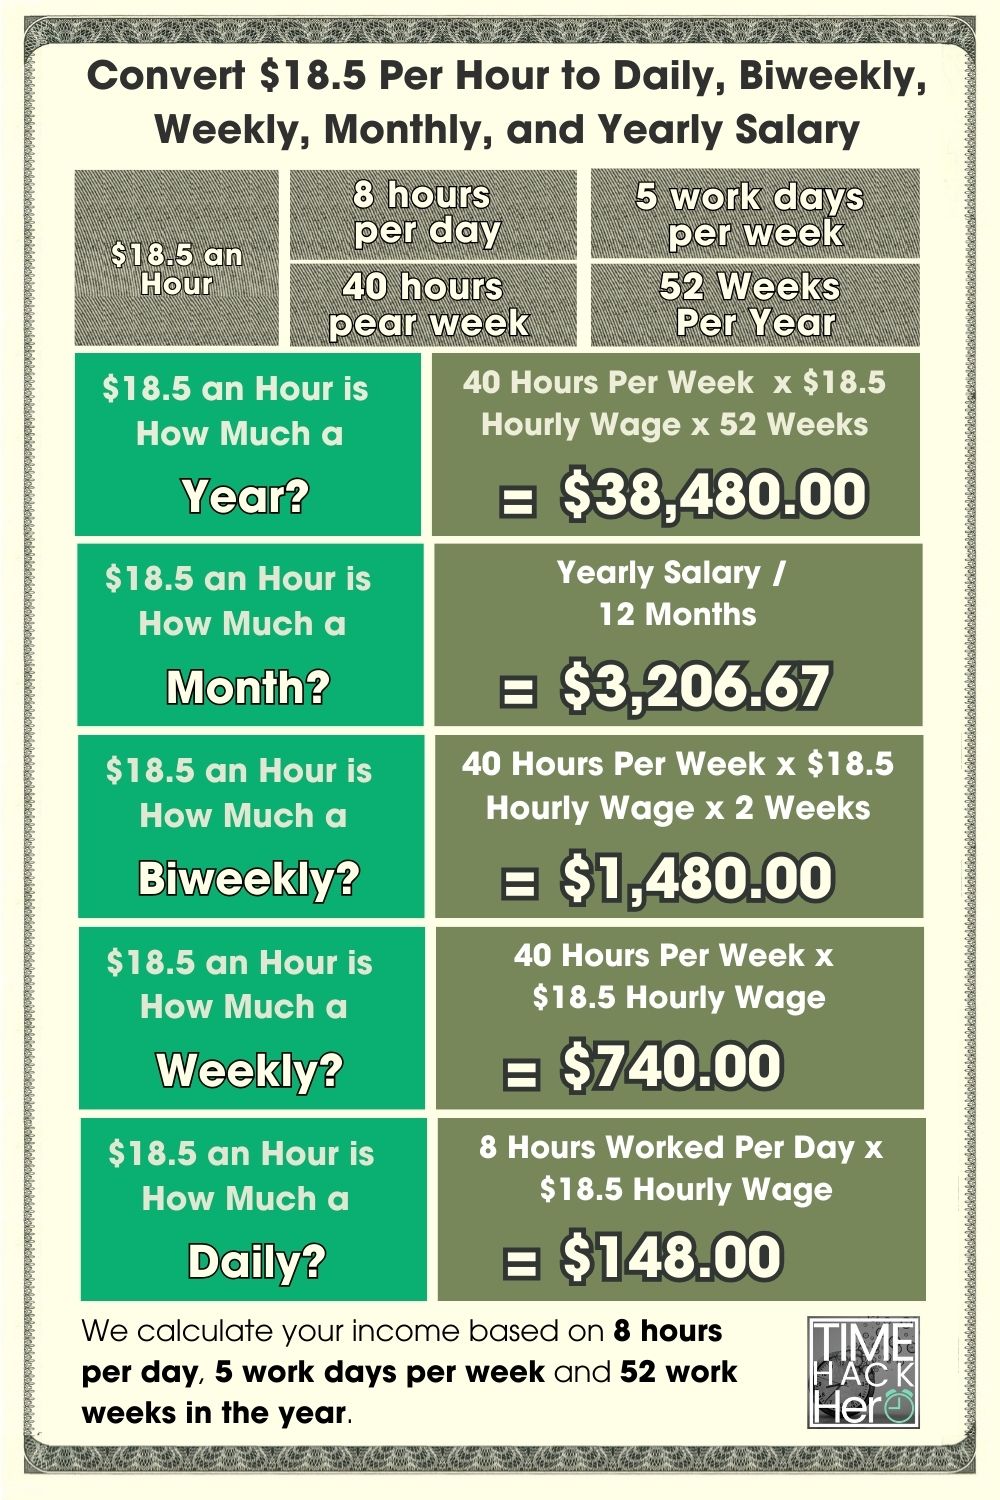 Convert $18.5 Per Hour to Daily, Biweekly, Weekly, Monthly, and Yearly Salary